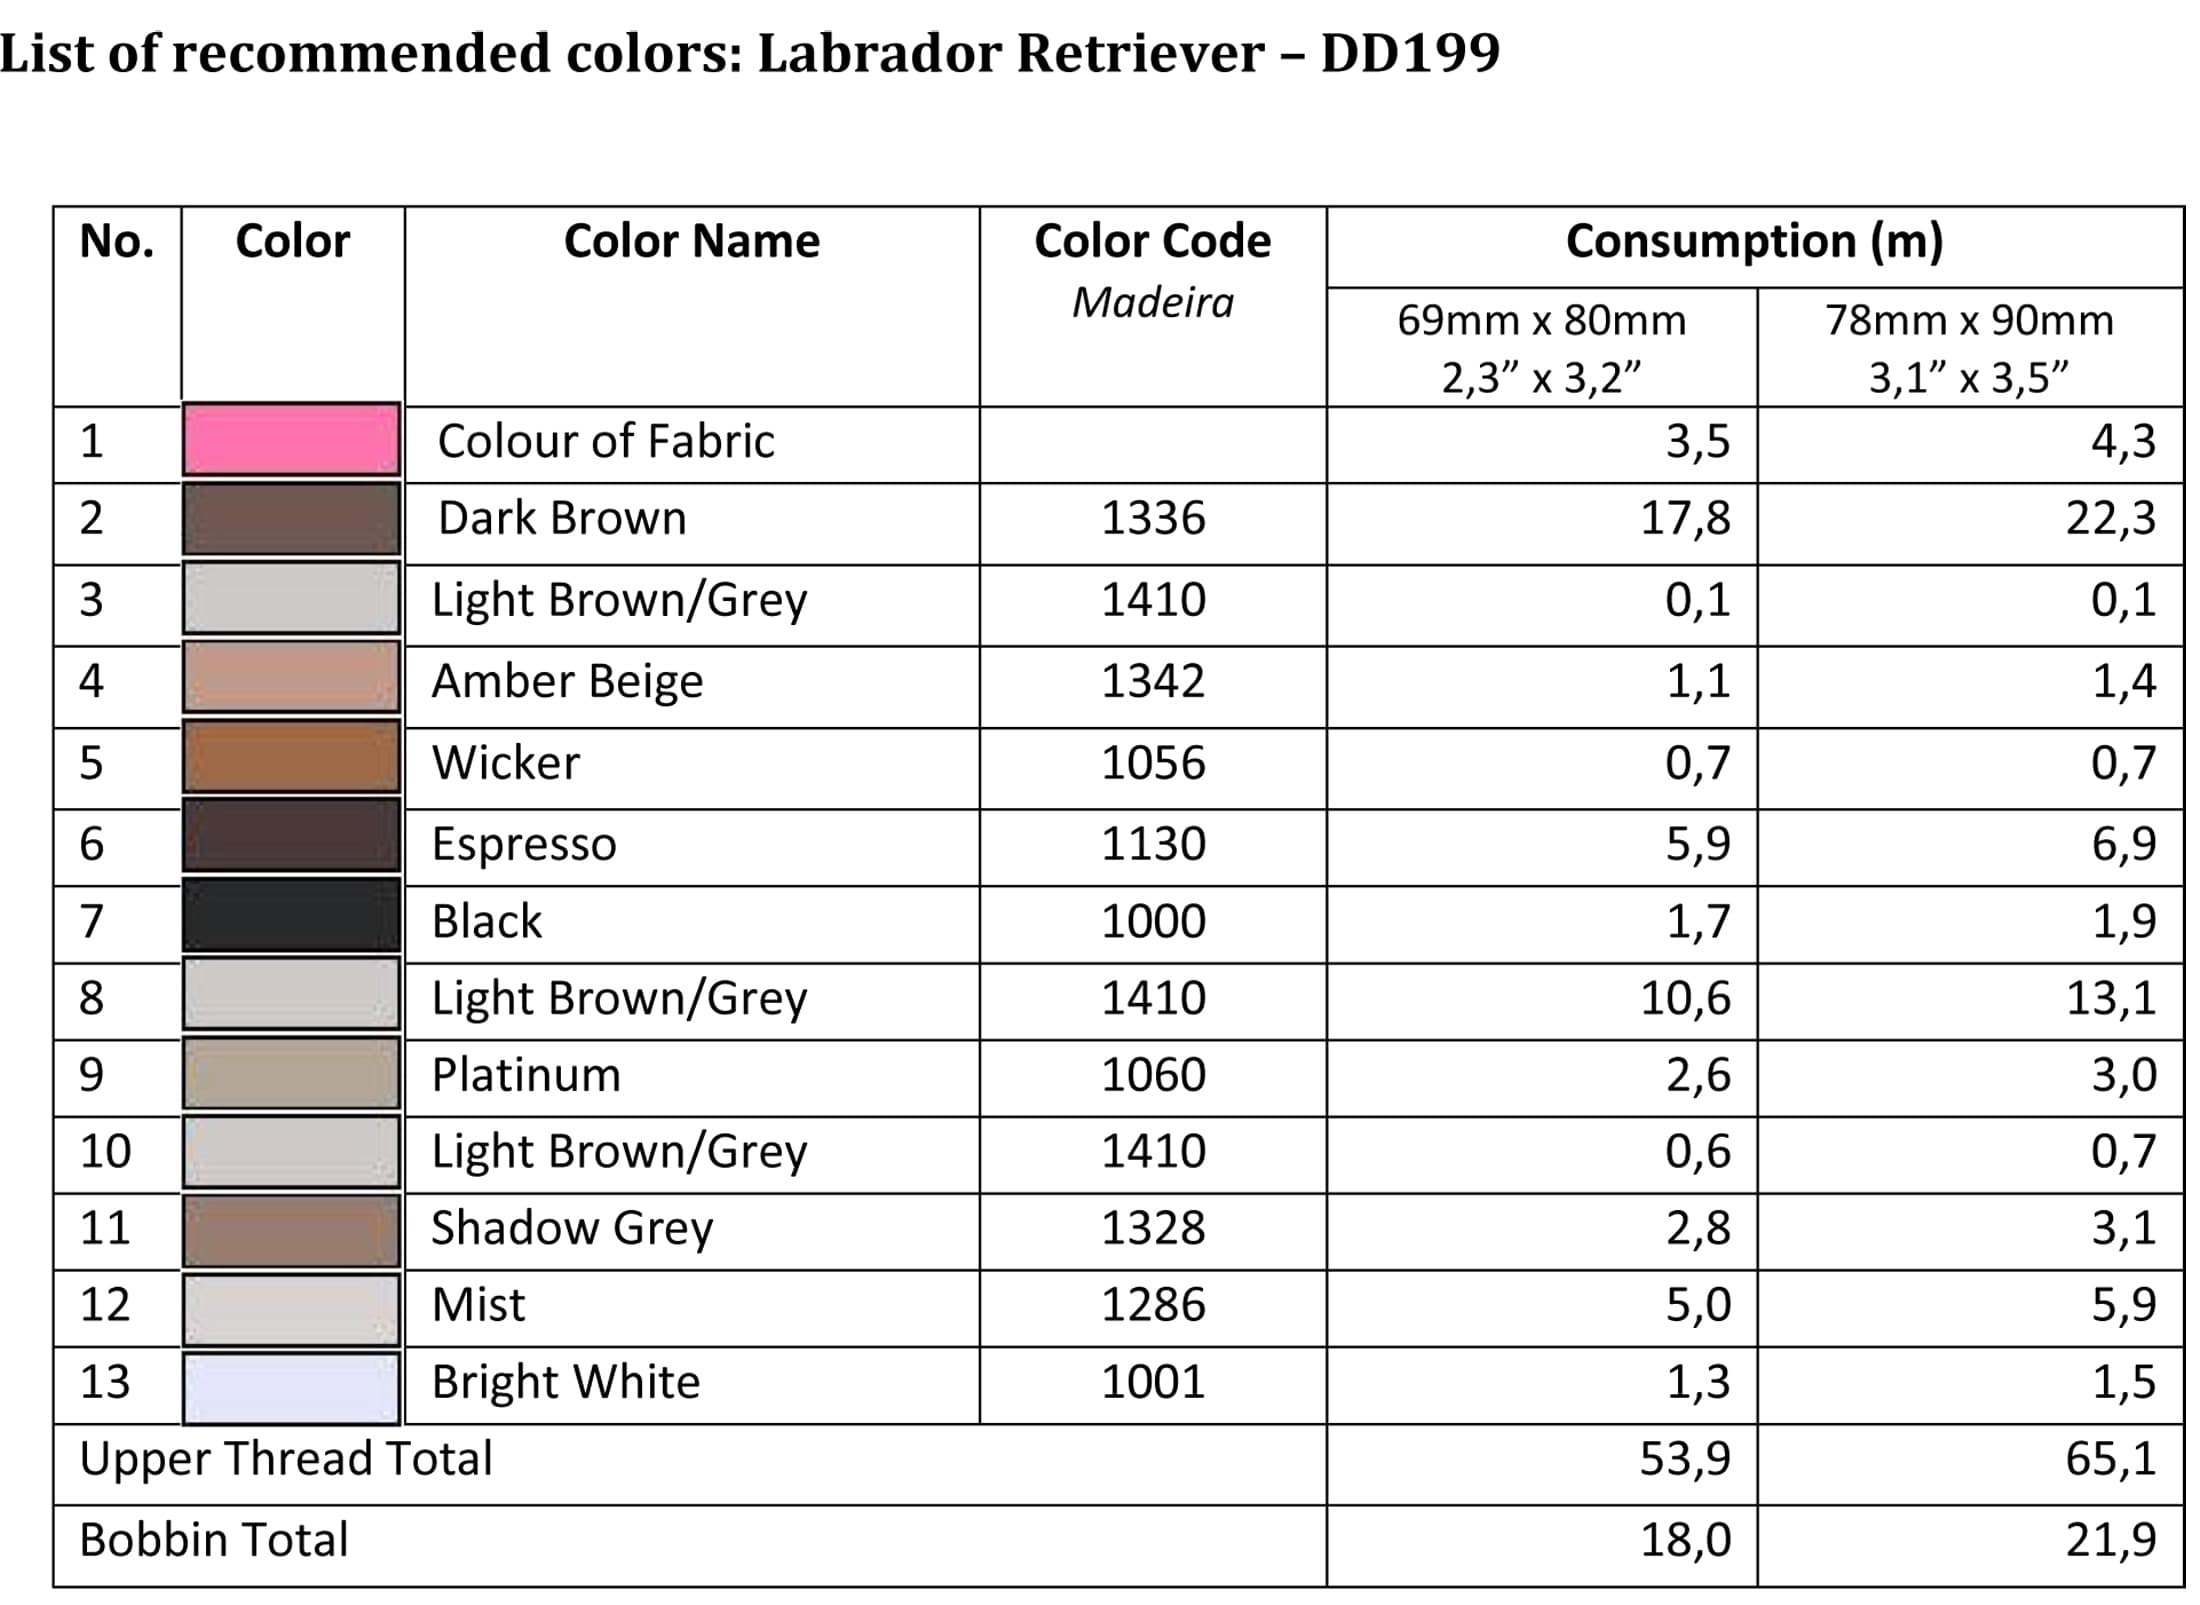 List of recommended colors - DD199